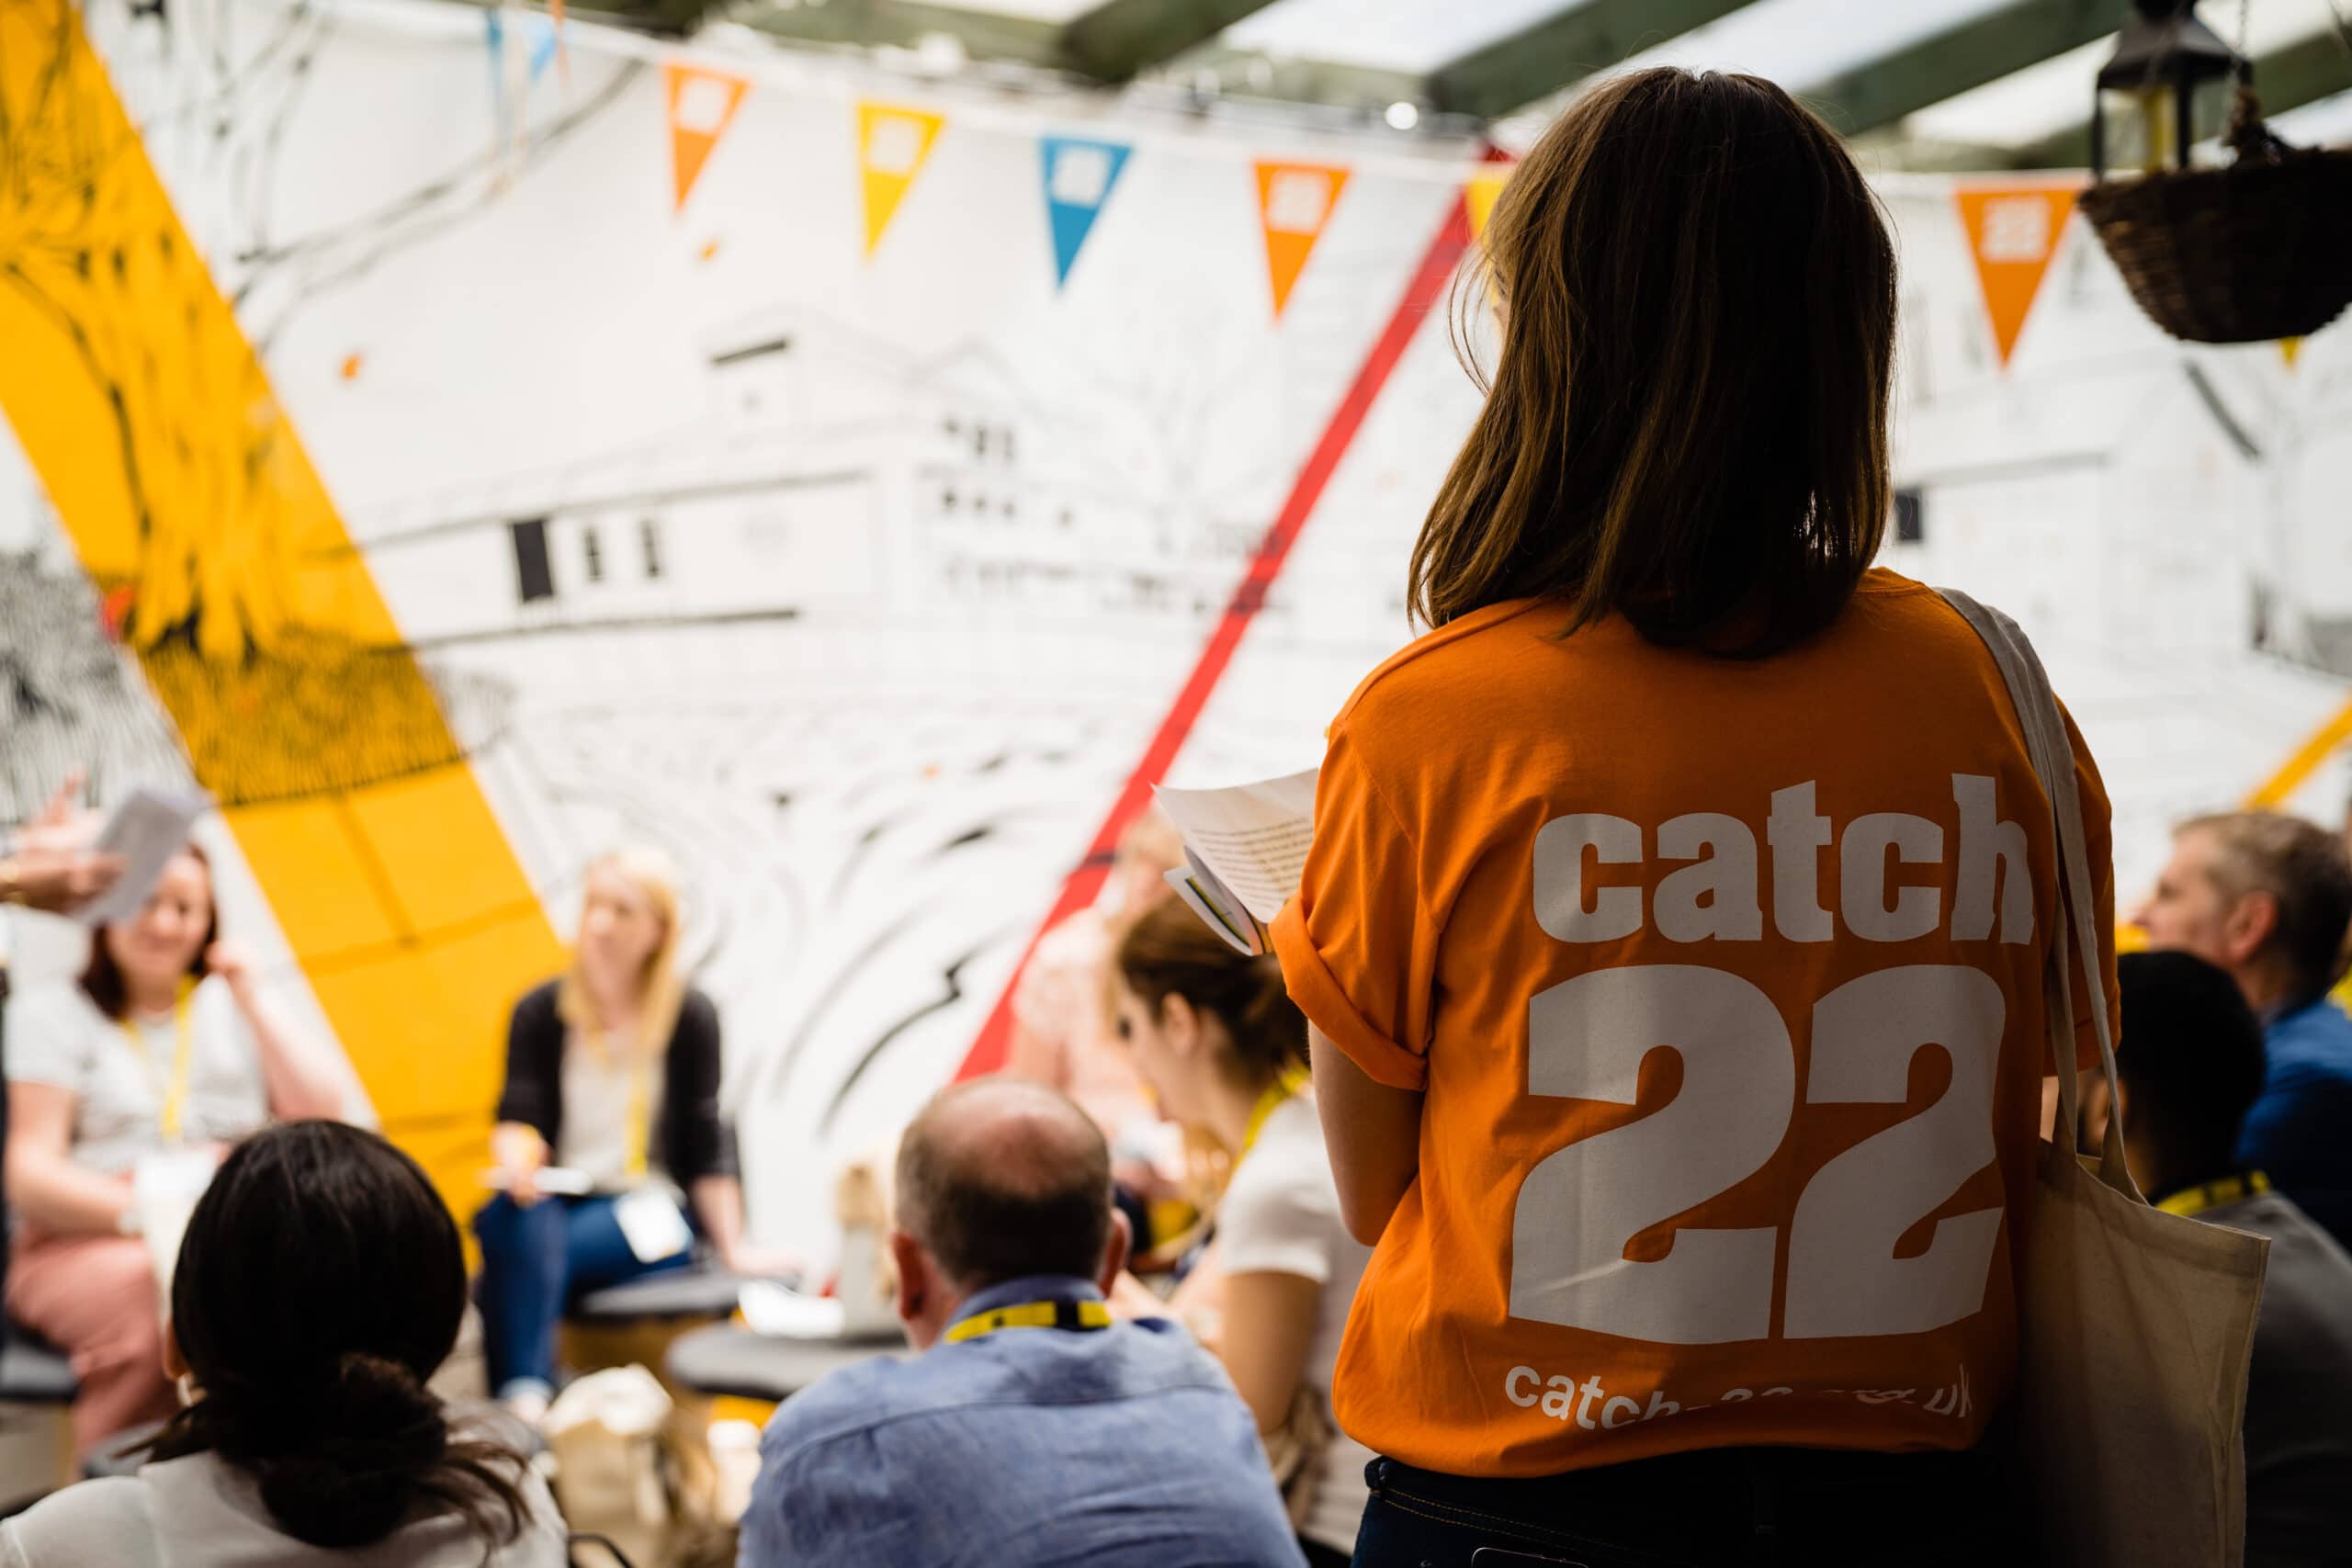 A woman stands in the foreground wearing an orange Catch22 tshirt with a Catch22-branded fabric tote bag. In the background, people are taking part in a workshop.